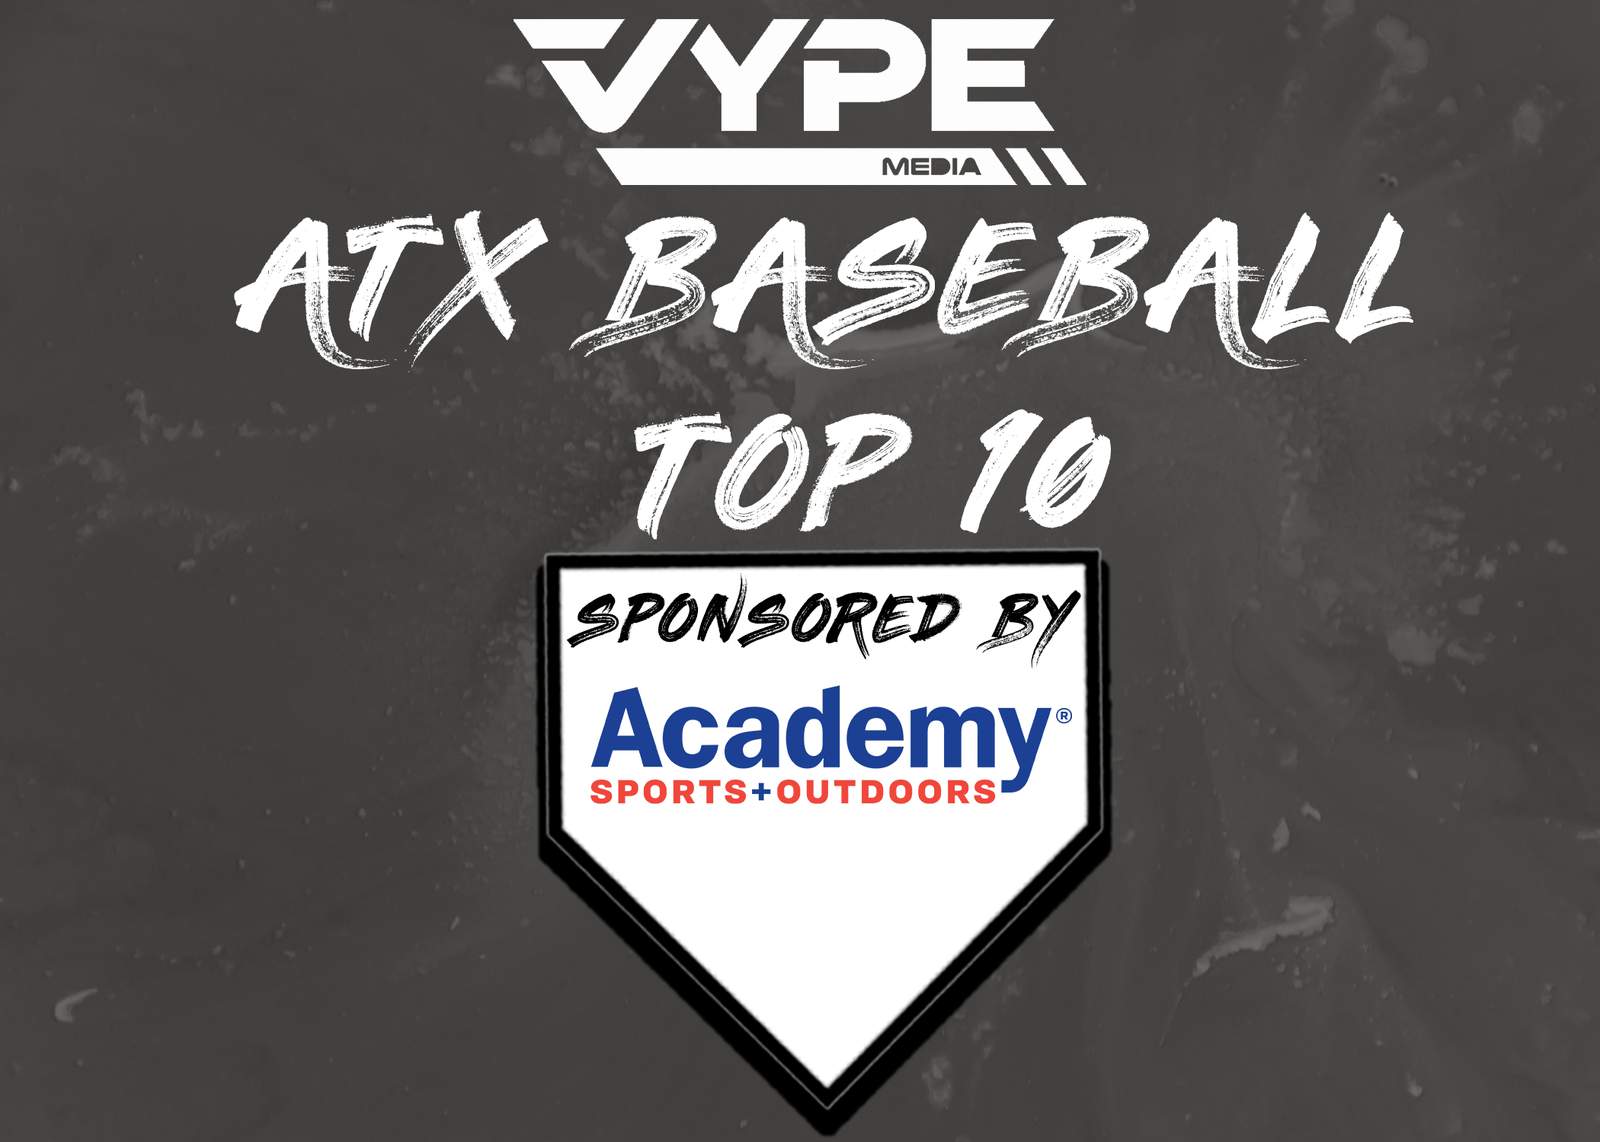 VYPE Austin Baseball Rankings: Week of 4/12/21 presented by Academy Sports + Outdoors